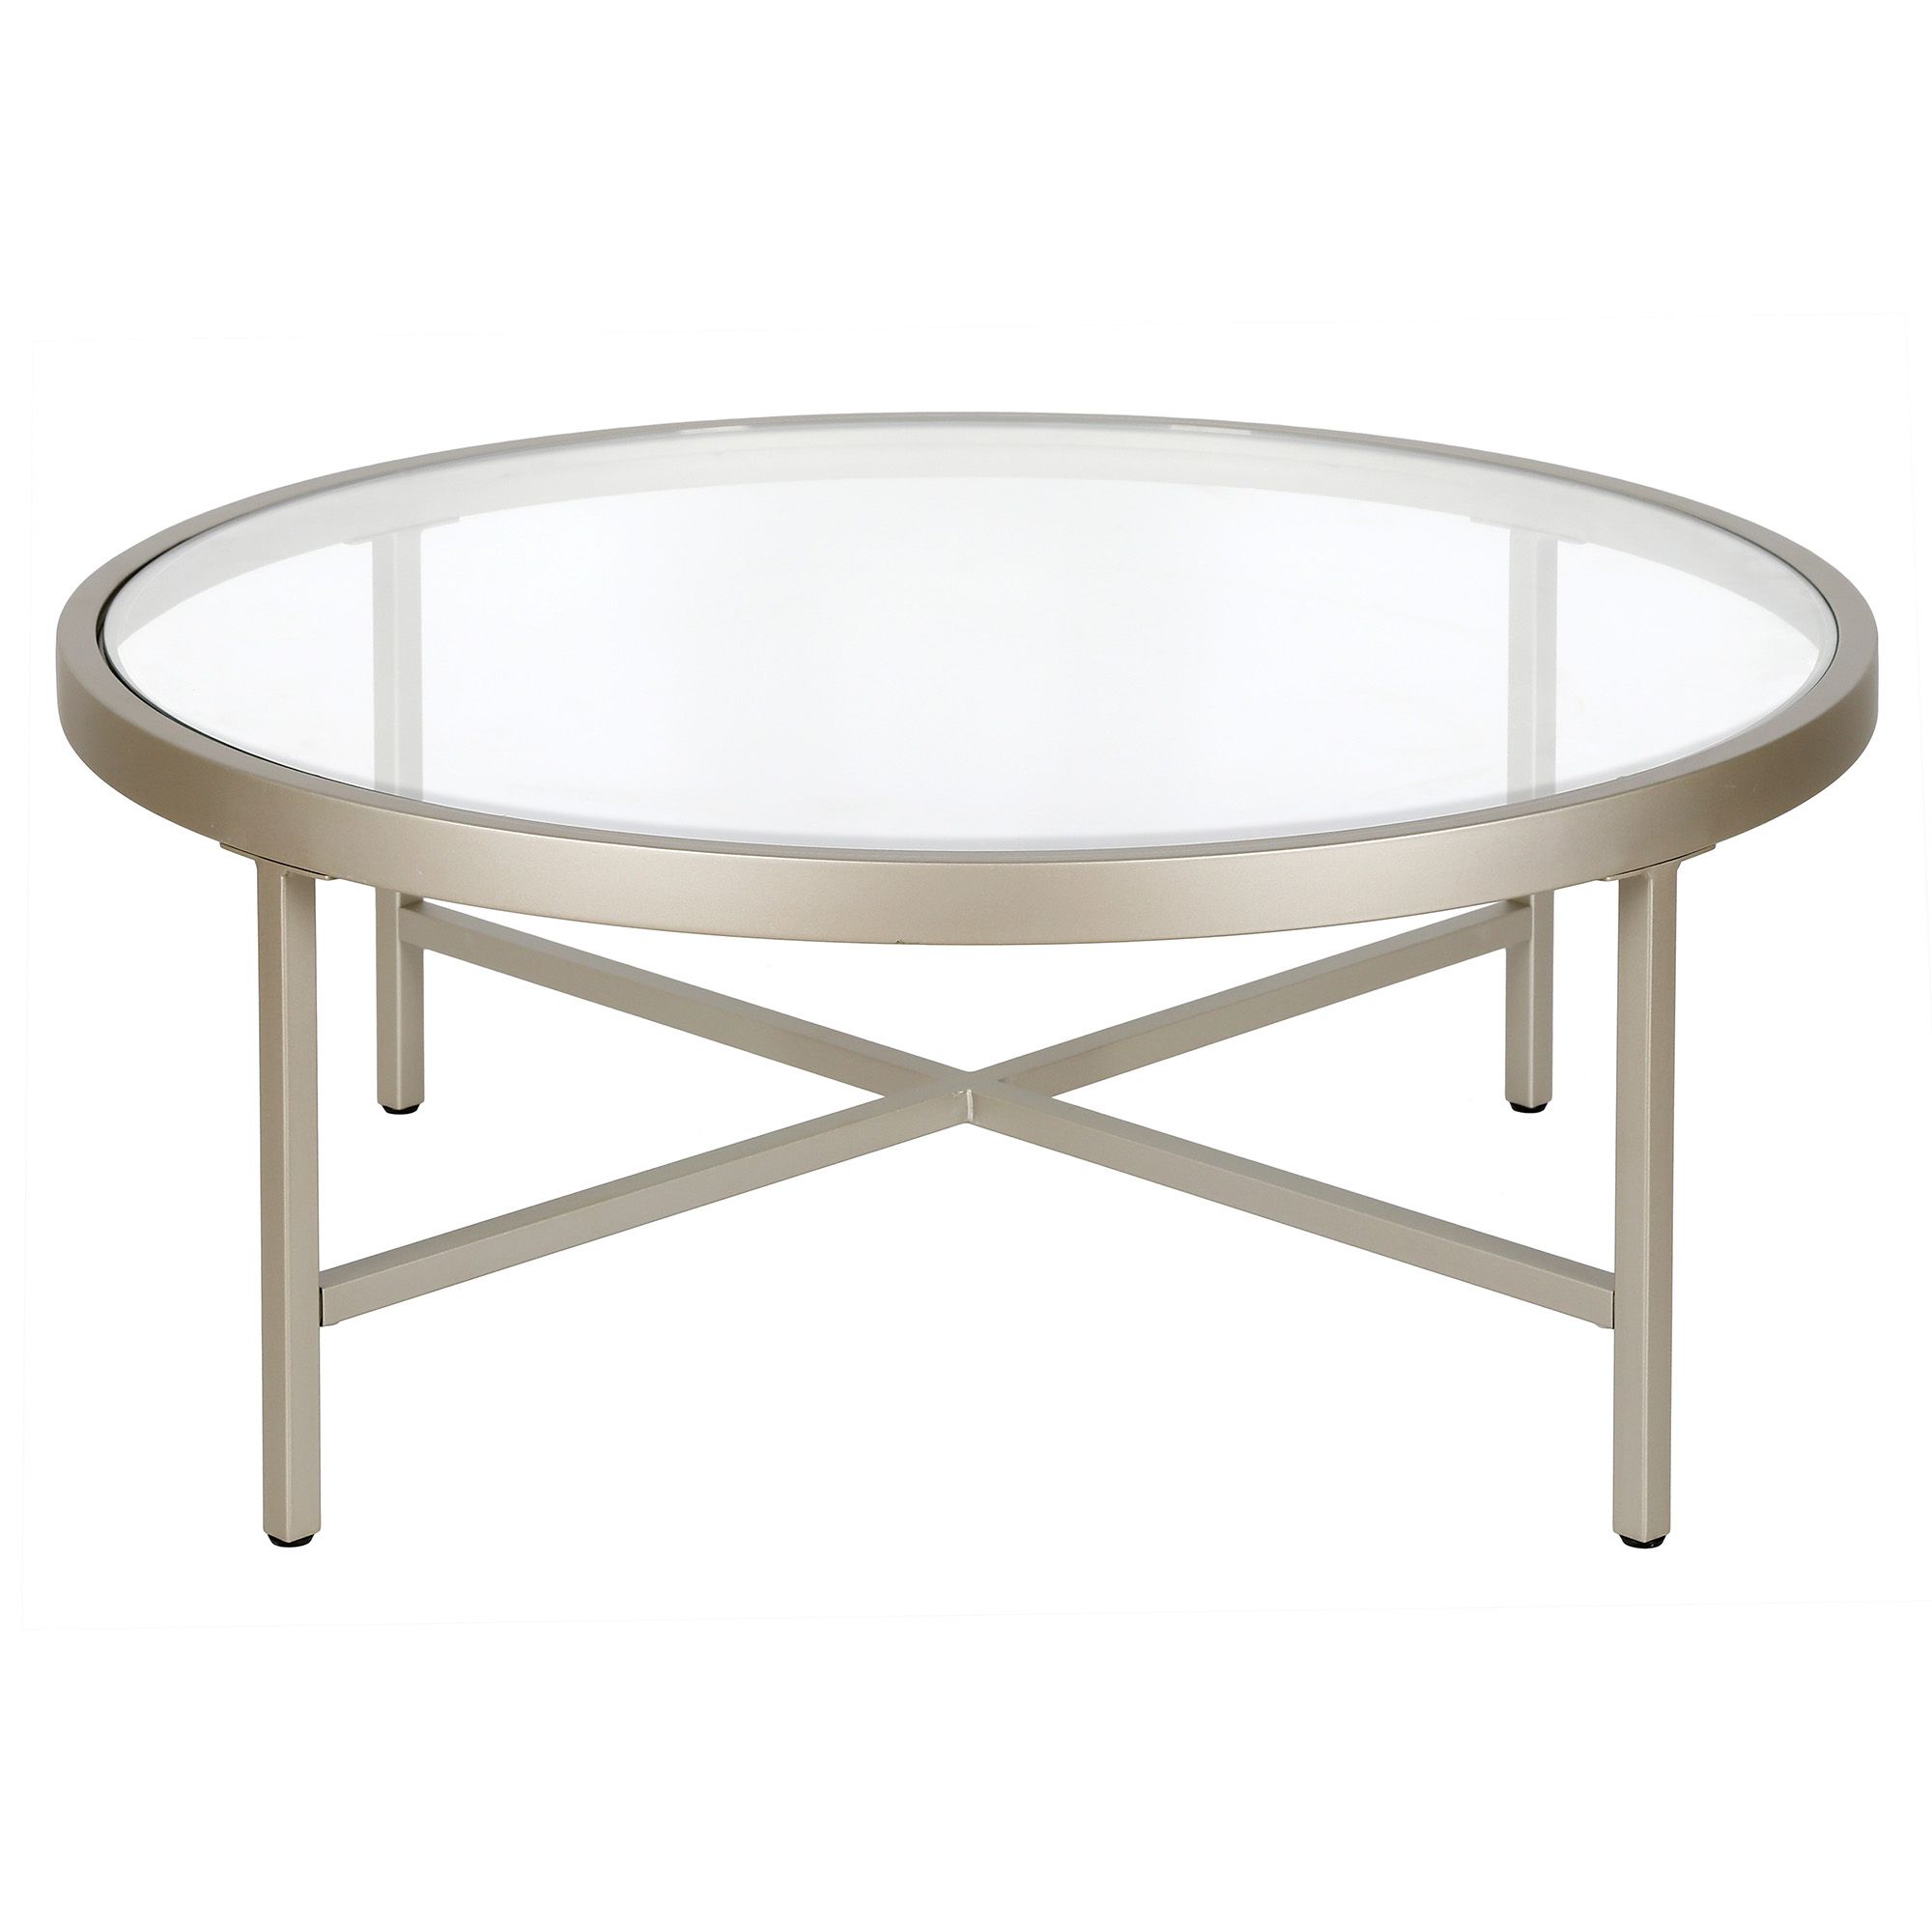 Well Known Evelyn&zoe Contemporary Round Coffee Table With Glass Top – Walmart Within Glass Coffee Tables (View 3 of 10)